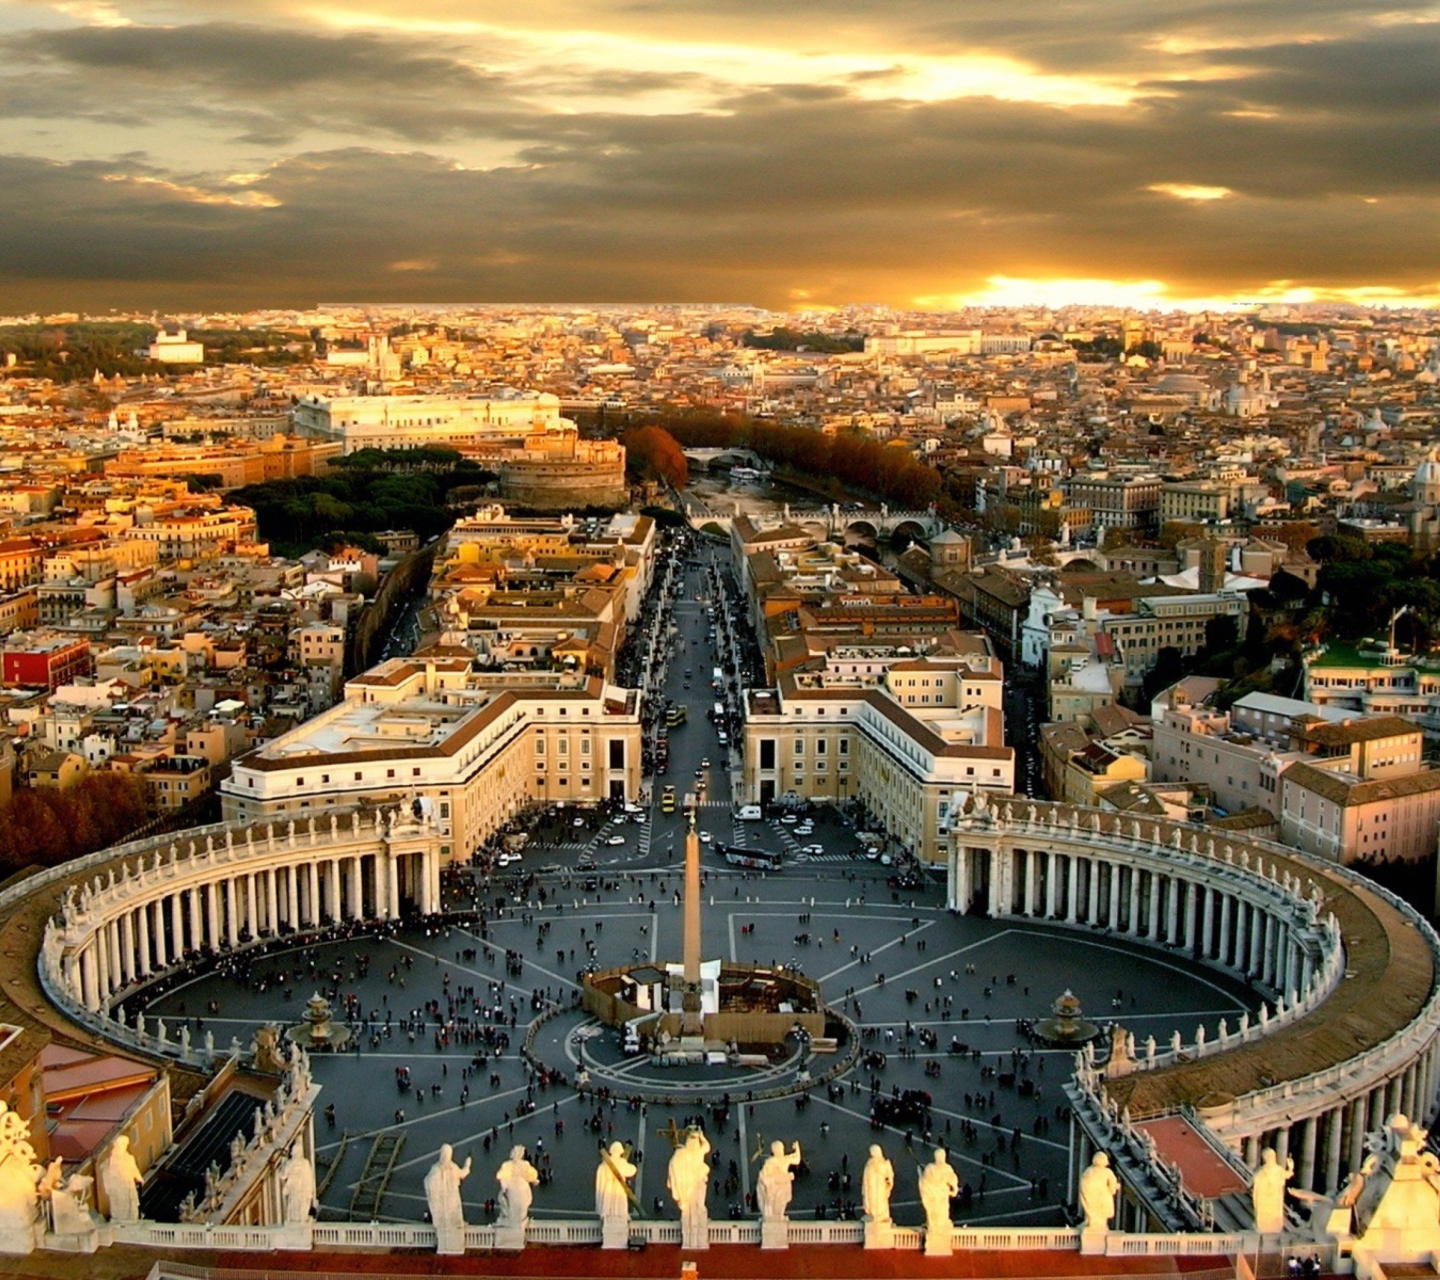 St. Peter's Square in Rome wallpaper 1440x1280